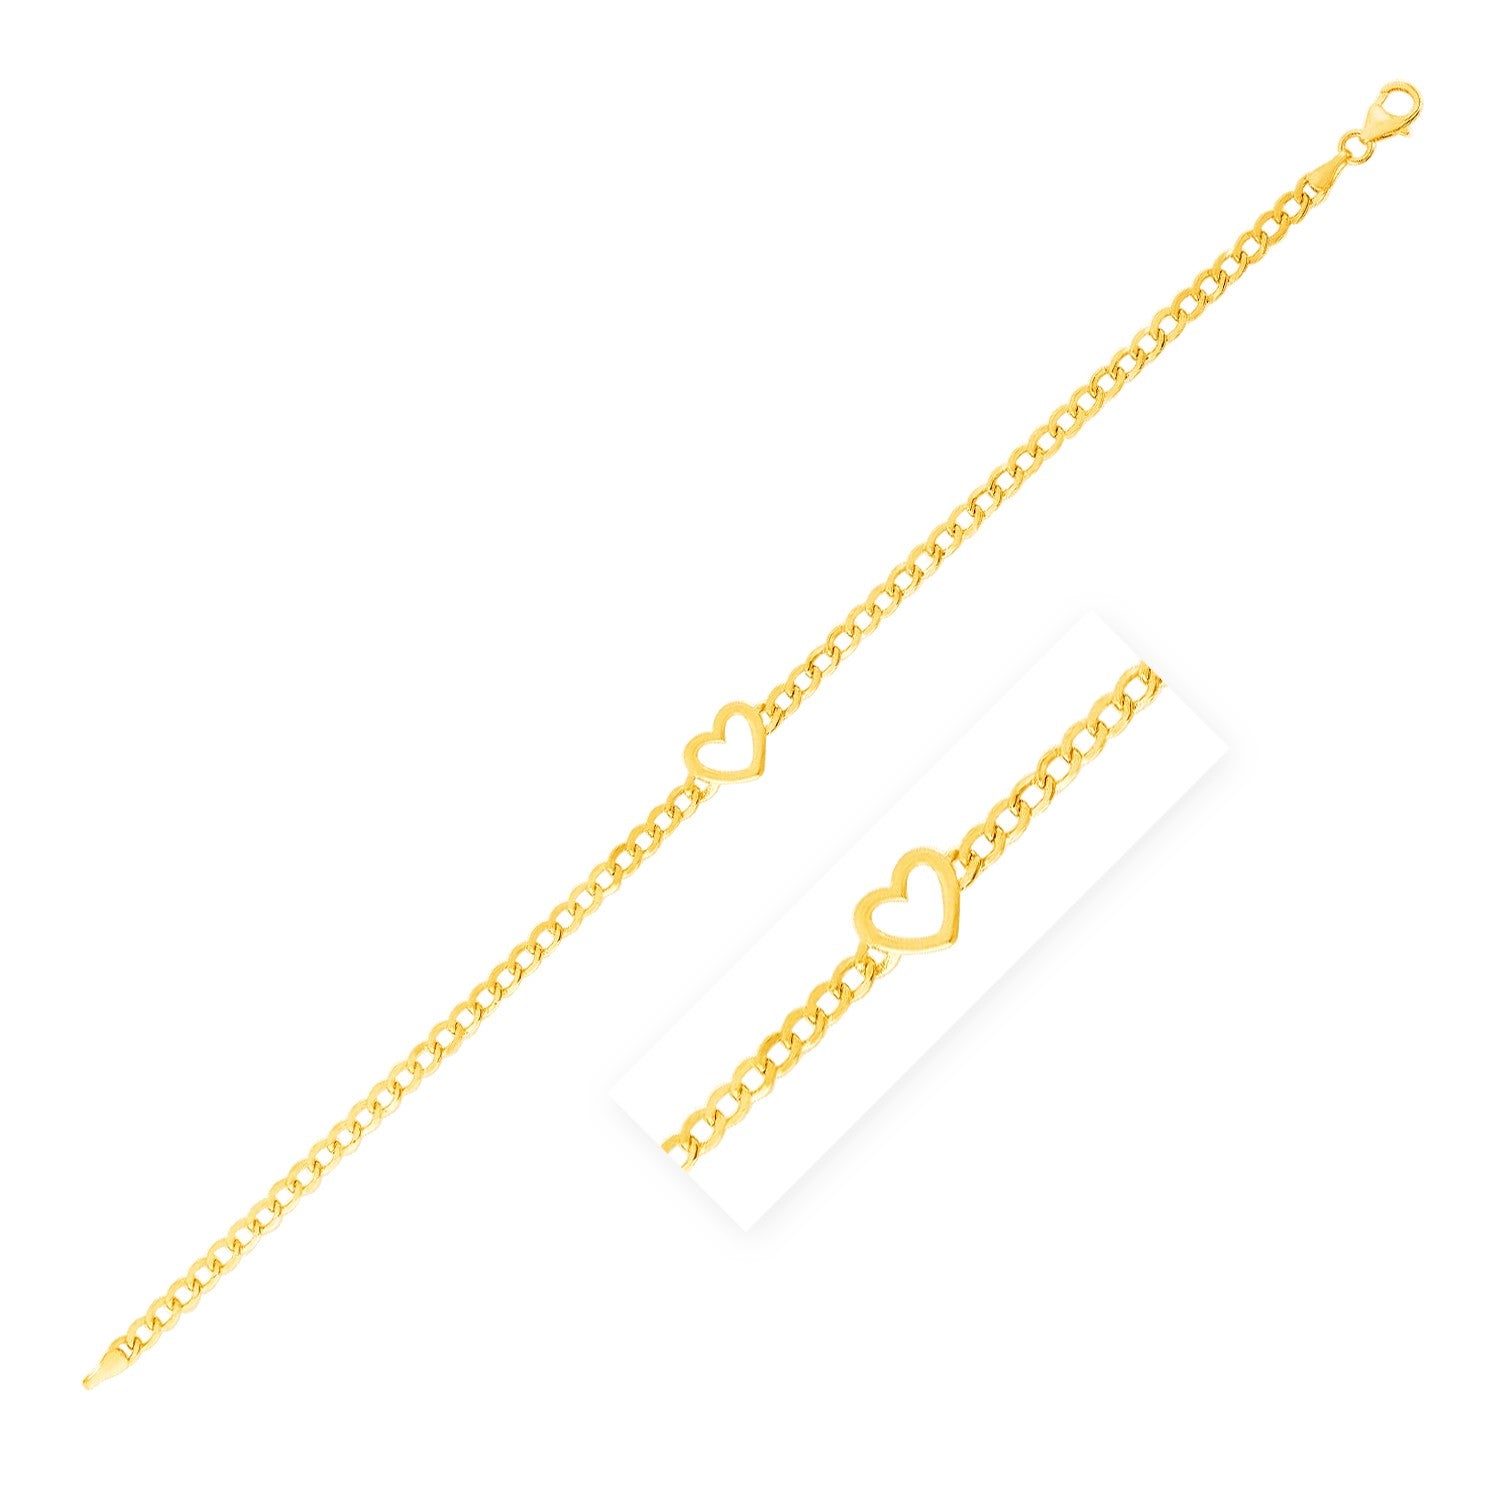 14k Yellow Gold 7 inch Curb Chain Bracelet with Heart